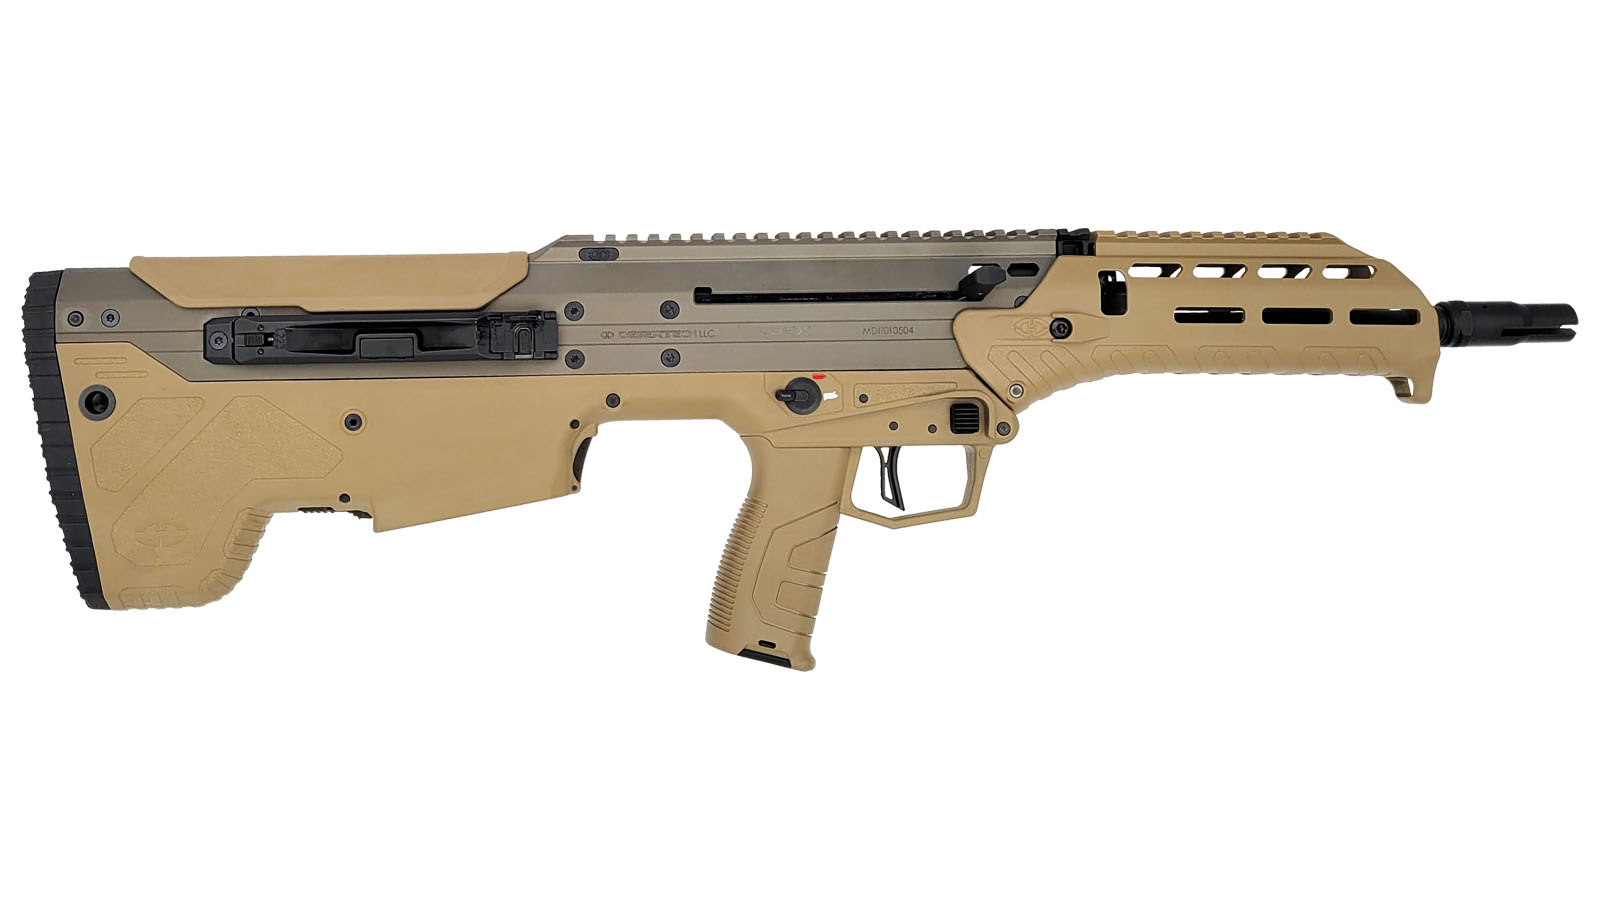 MDRx Rifle, 556NATO 223Rem 16" 10rd Forward-Ejection FDE